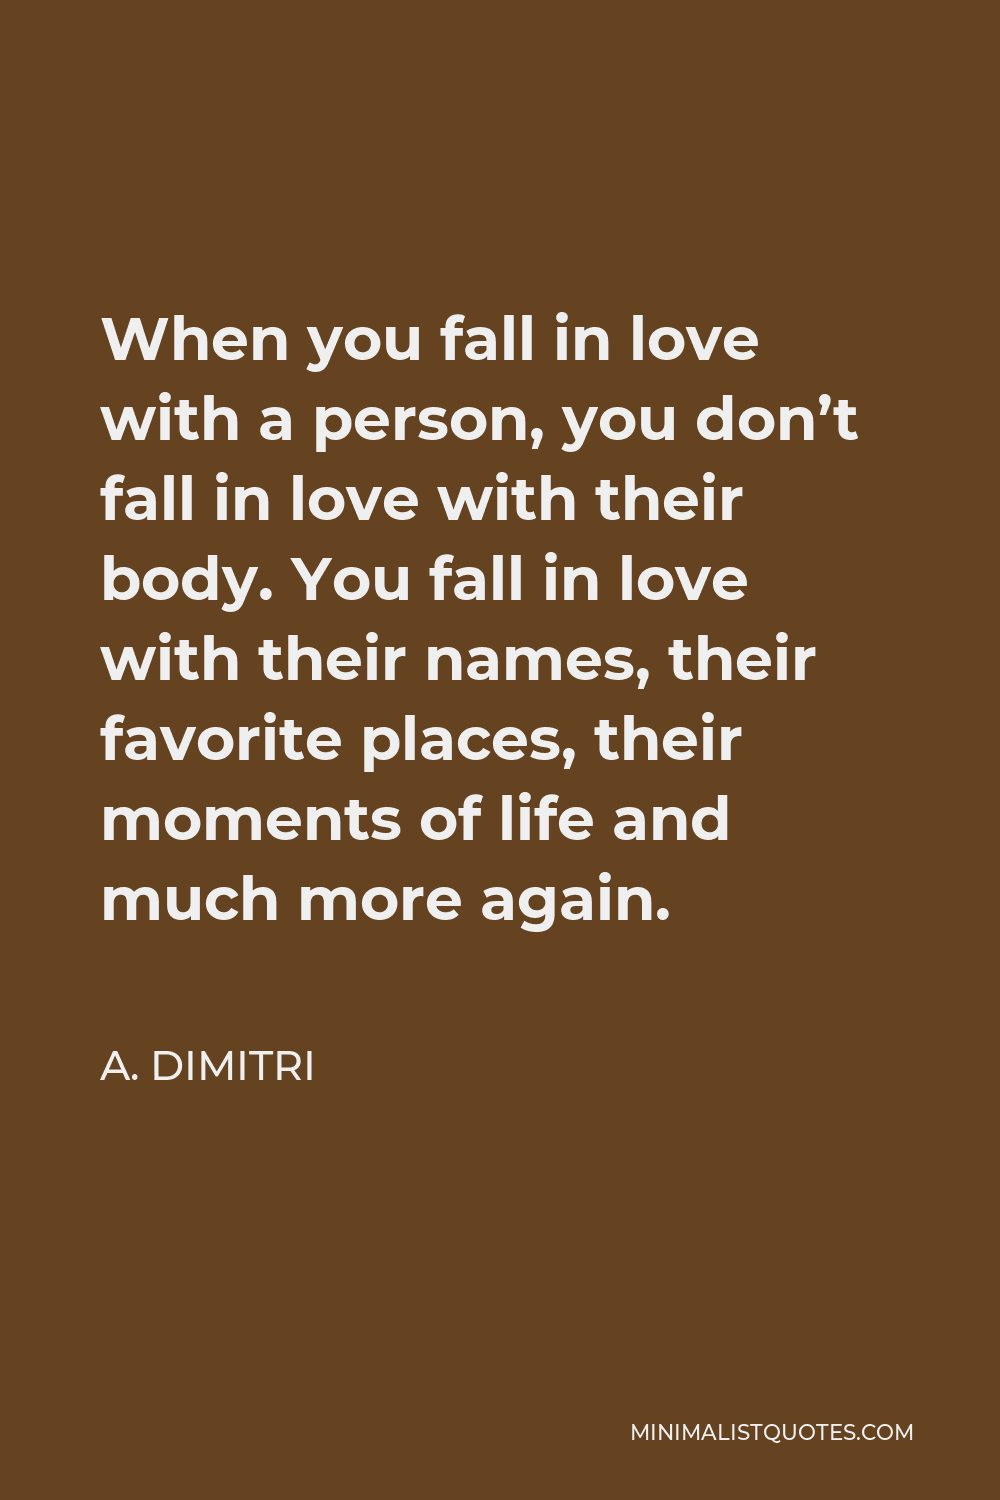 A. Dimitri Quote - When you fall in love with a person, you don’t fall in love with their body. You fall in love with their names, their favorite places, their moments of life and much more again.